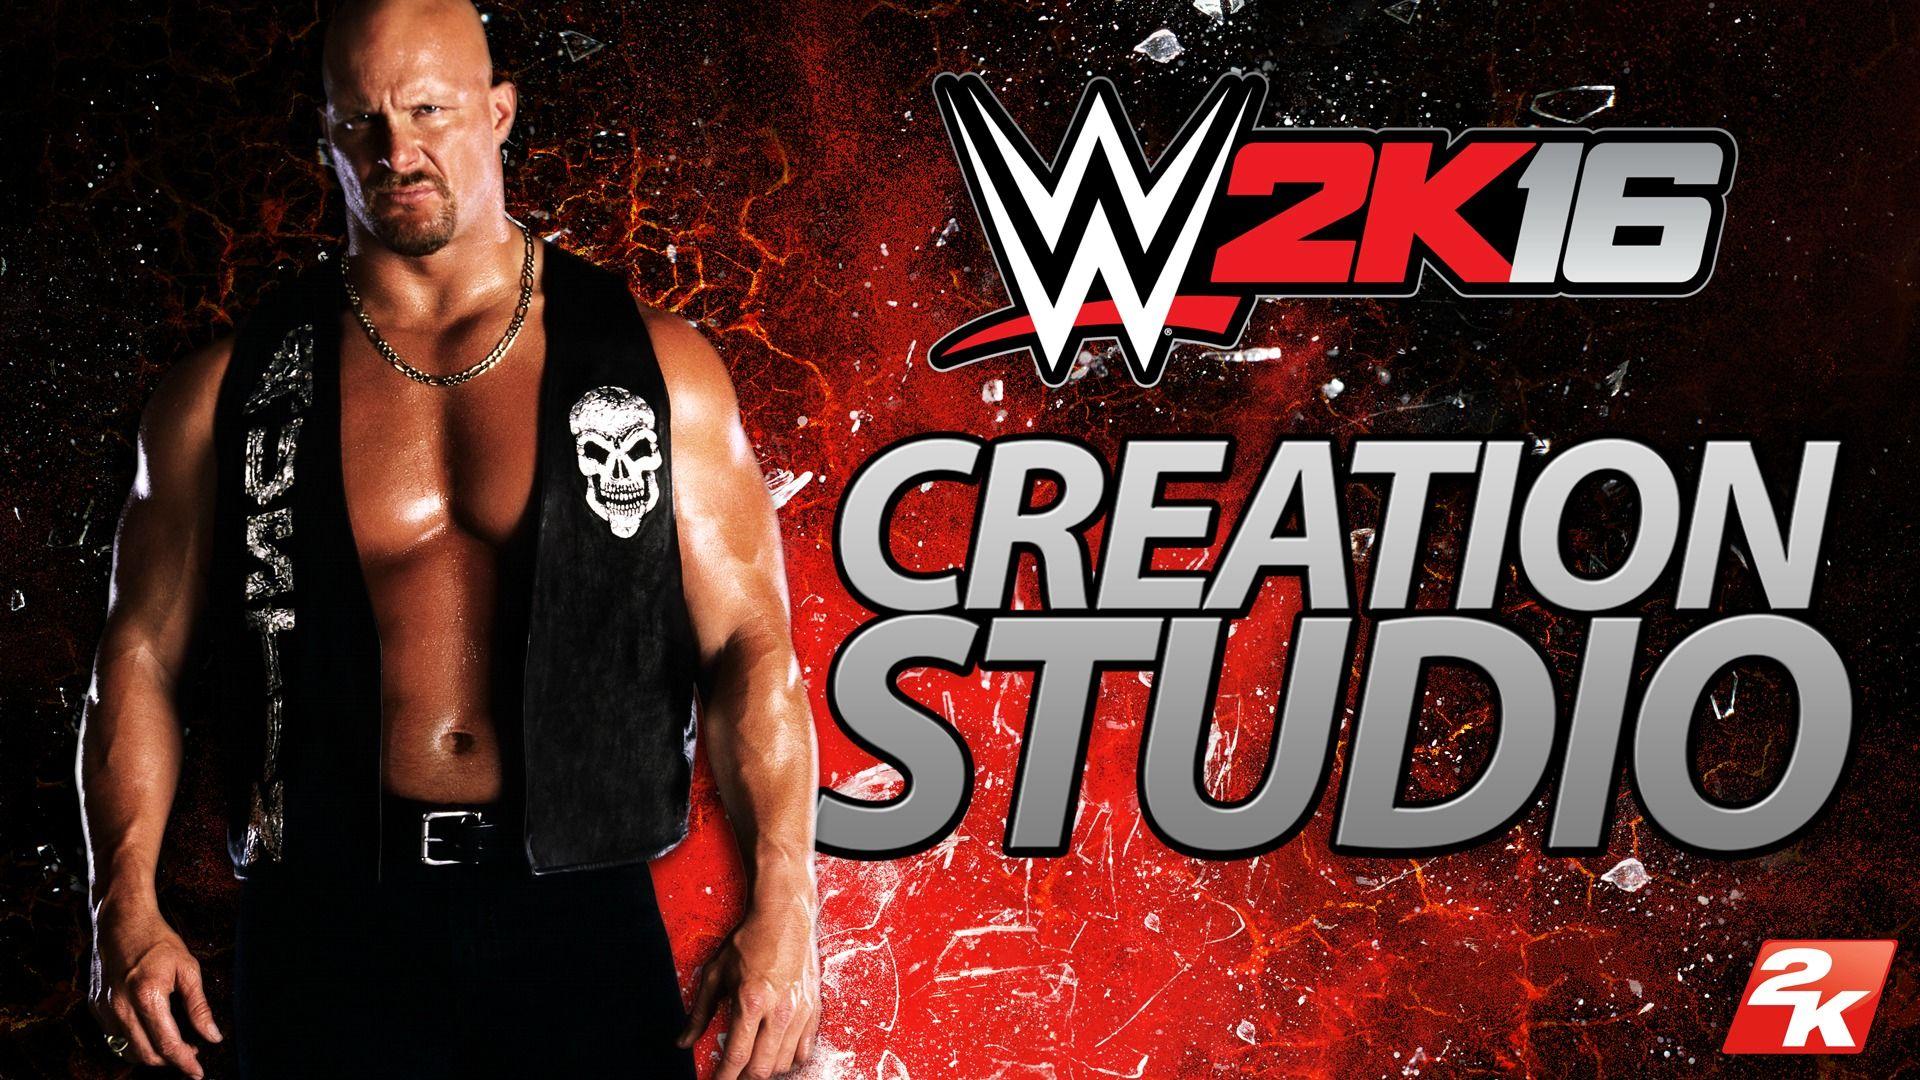 WWE 2K. News. The WWE 2K16 Creation Studio App Is Out Now!